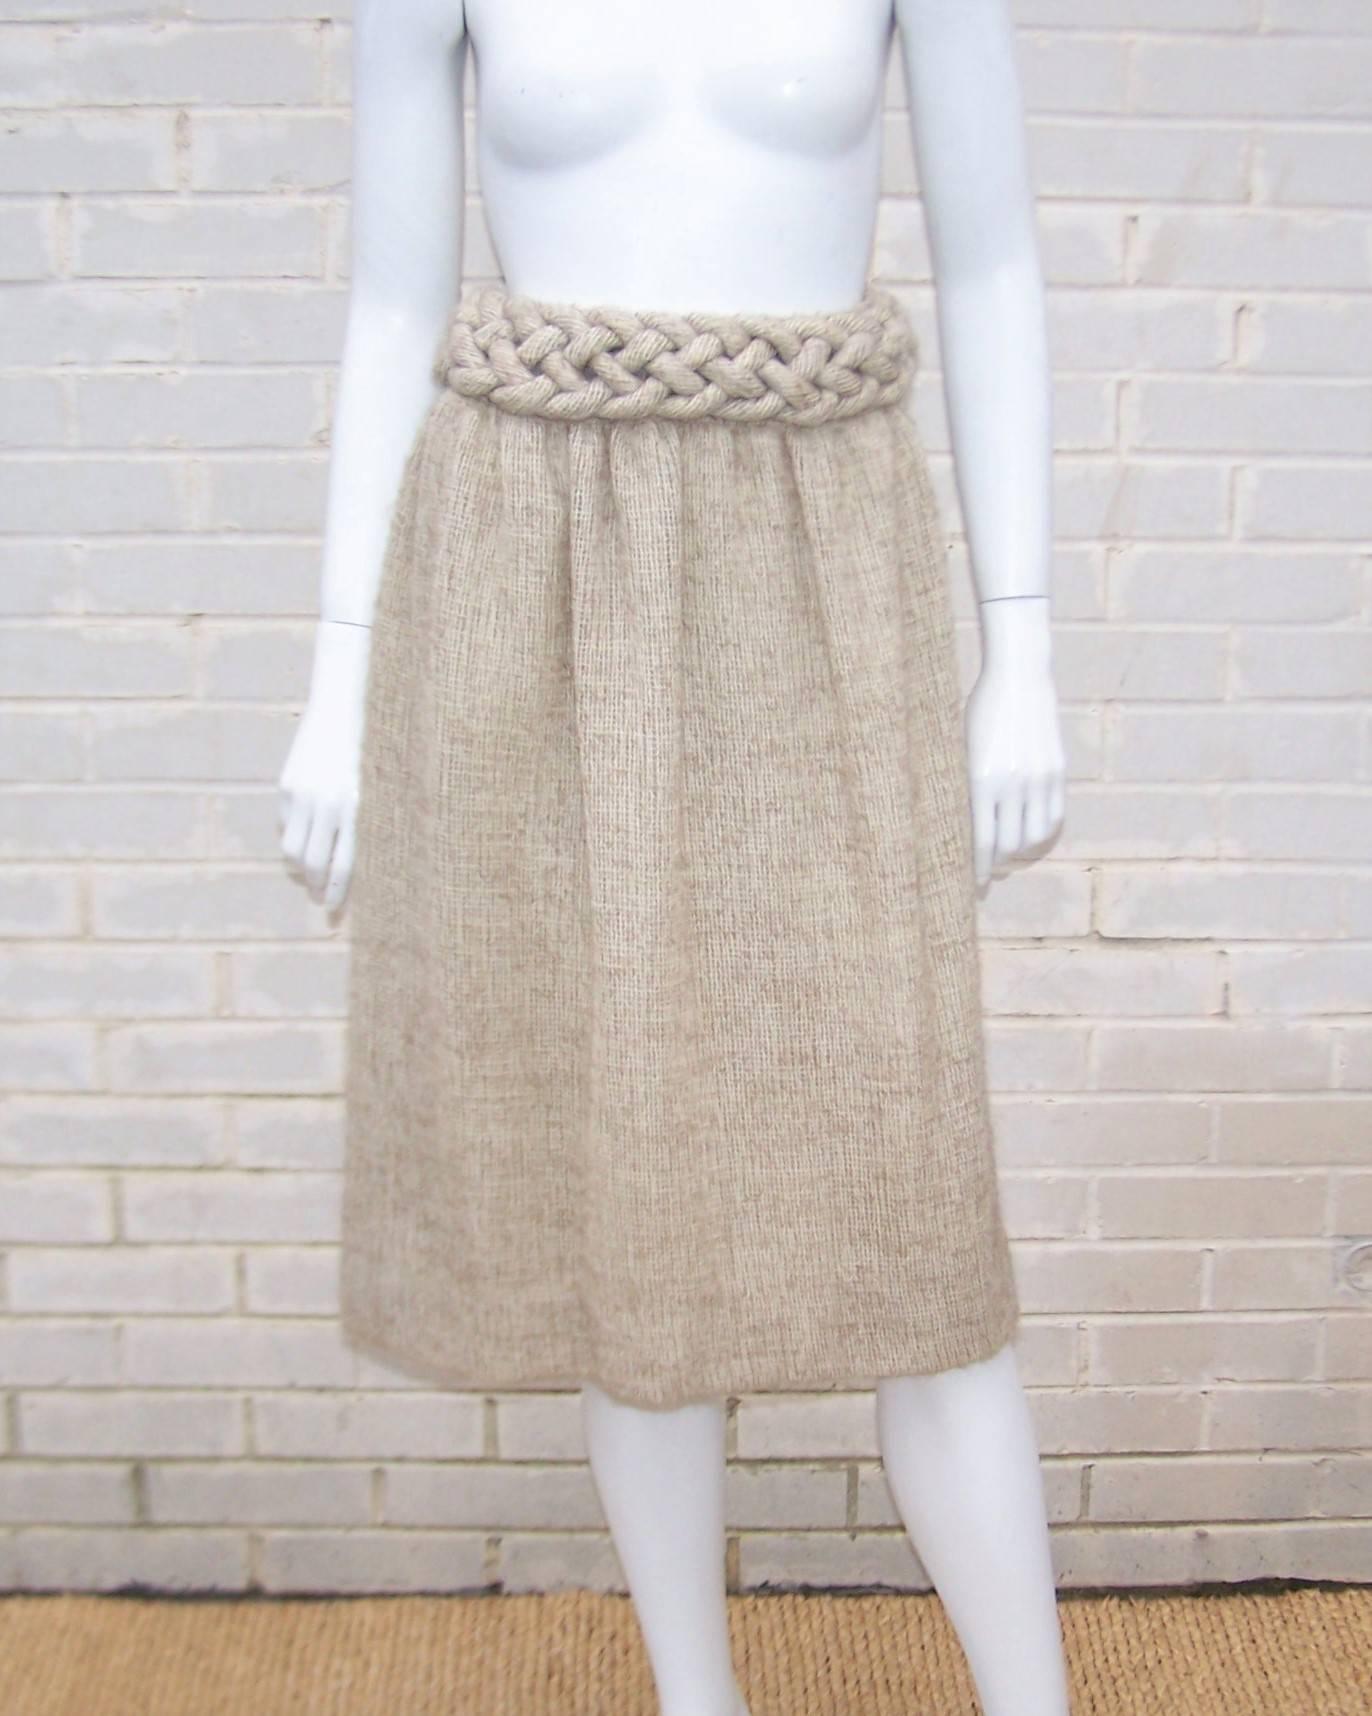 It's not usually a compliment to compare an article of designer clothing to a potato sack but Mary McFadden has managed to take it to a new level.  This soft burlap style fabric is an open weave with what appears to be a mohair blend making it a